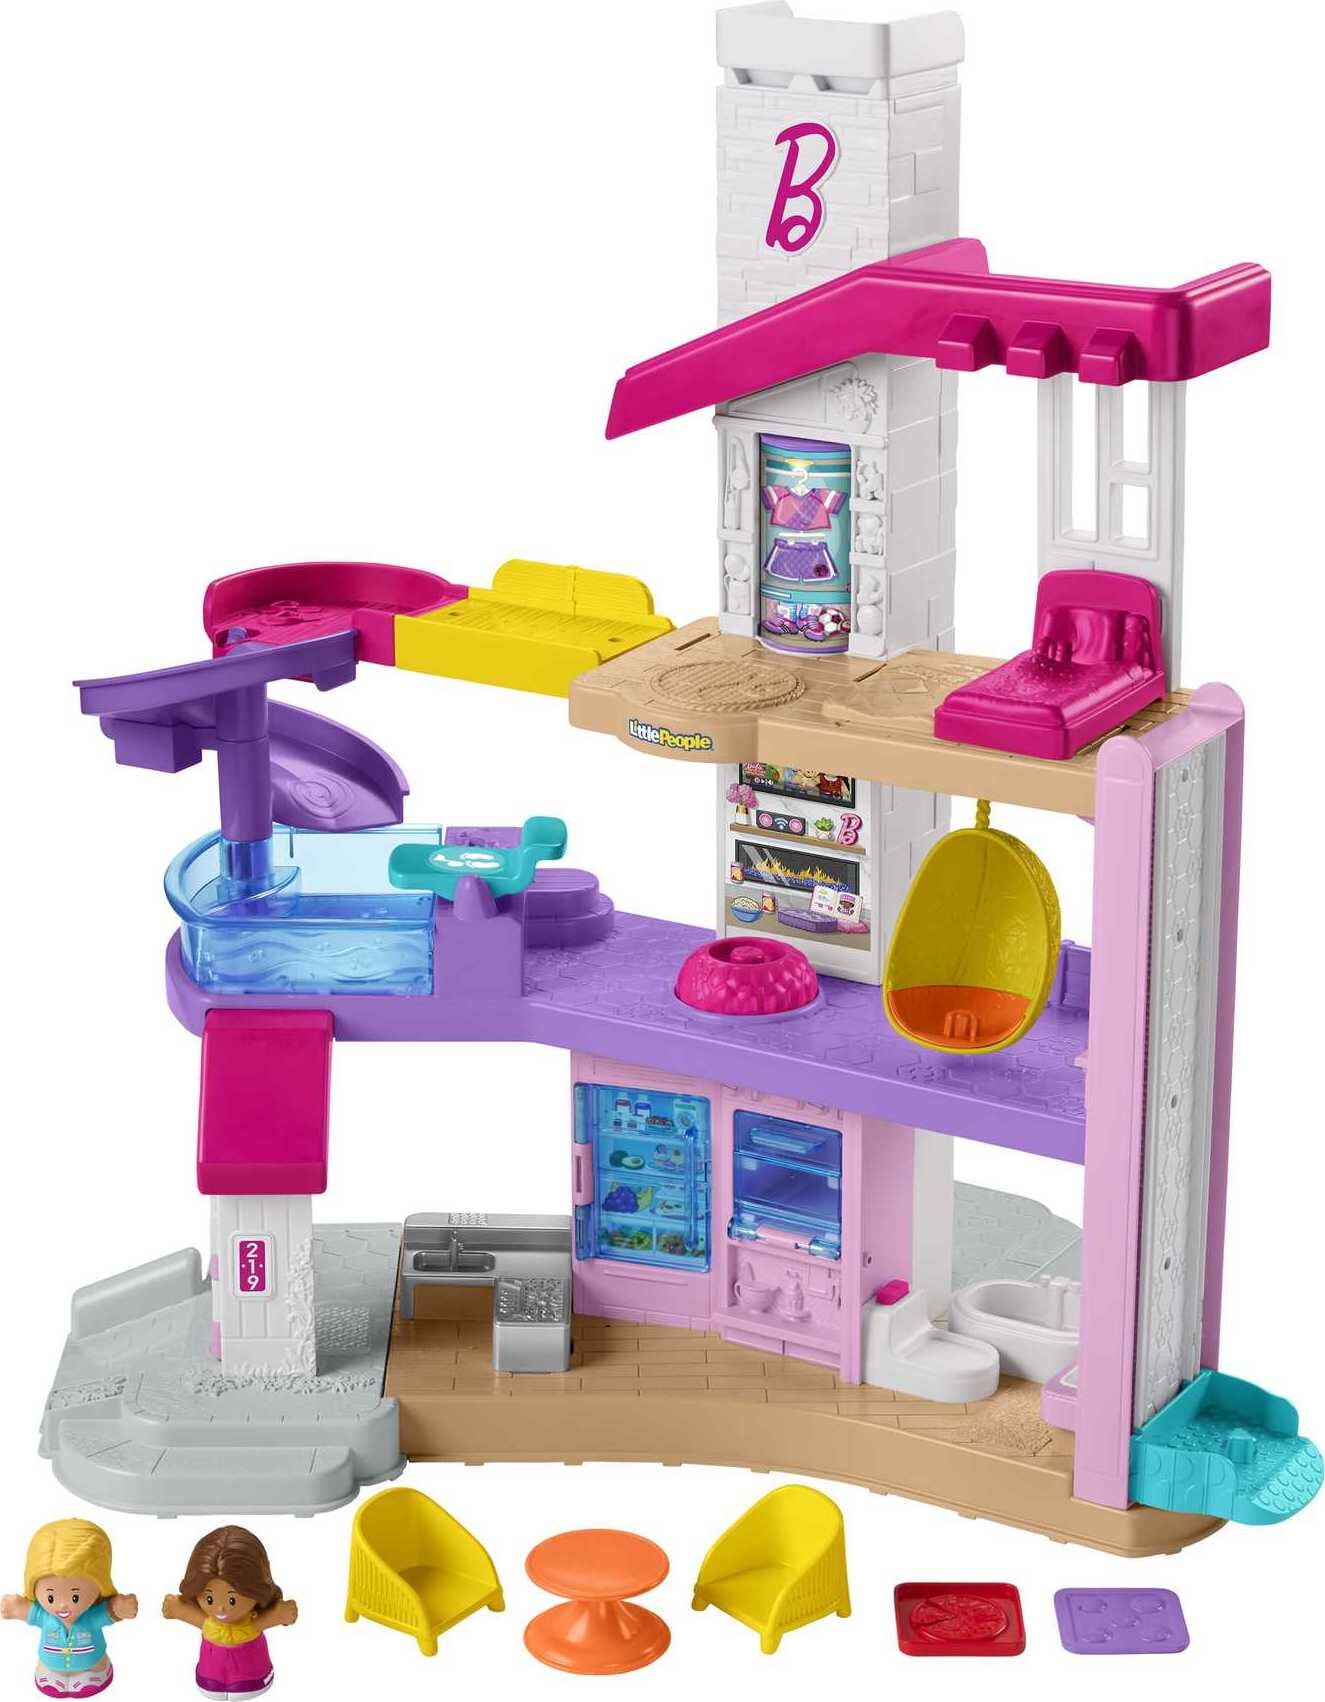 ​Barbie Little Dreamhouse by Fisher-Price Little People, Interactive Toddler Playset with Lights, Music, Phrases, Figures and Play Pieces - Walmart.com